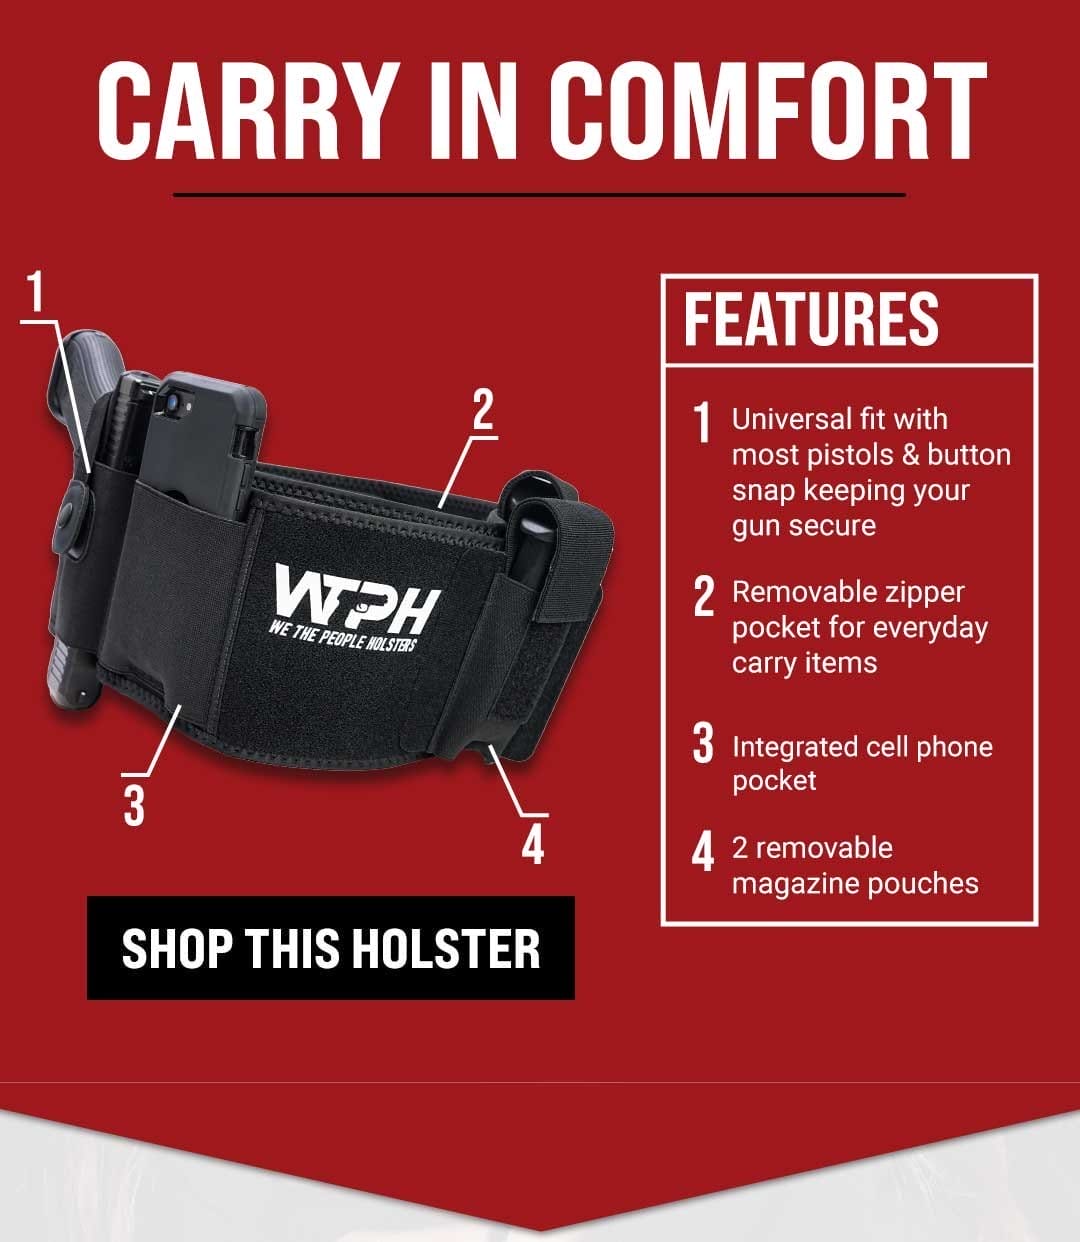 Belly Band Holster Features